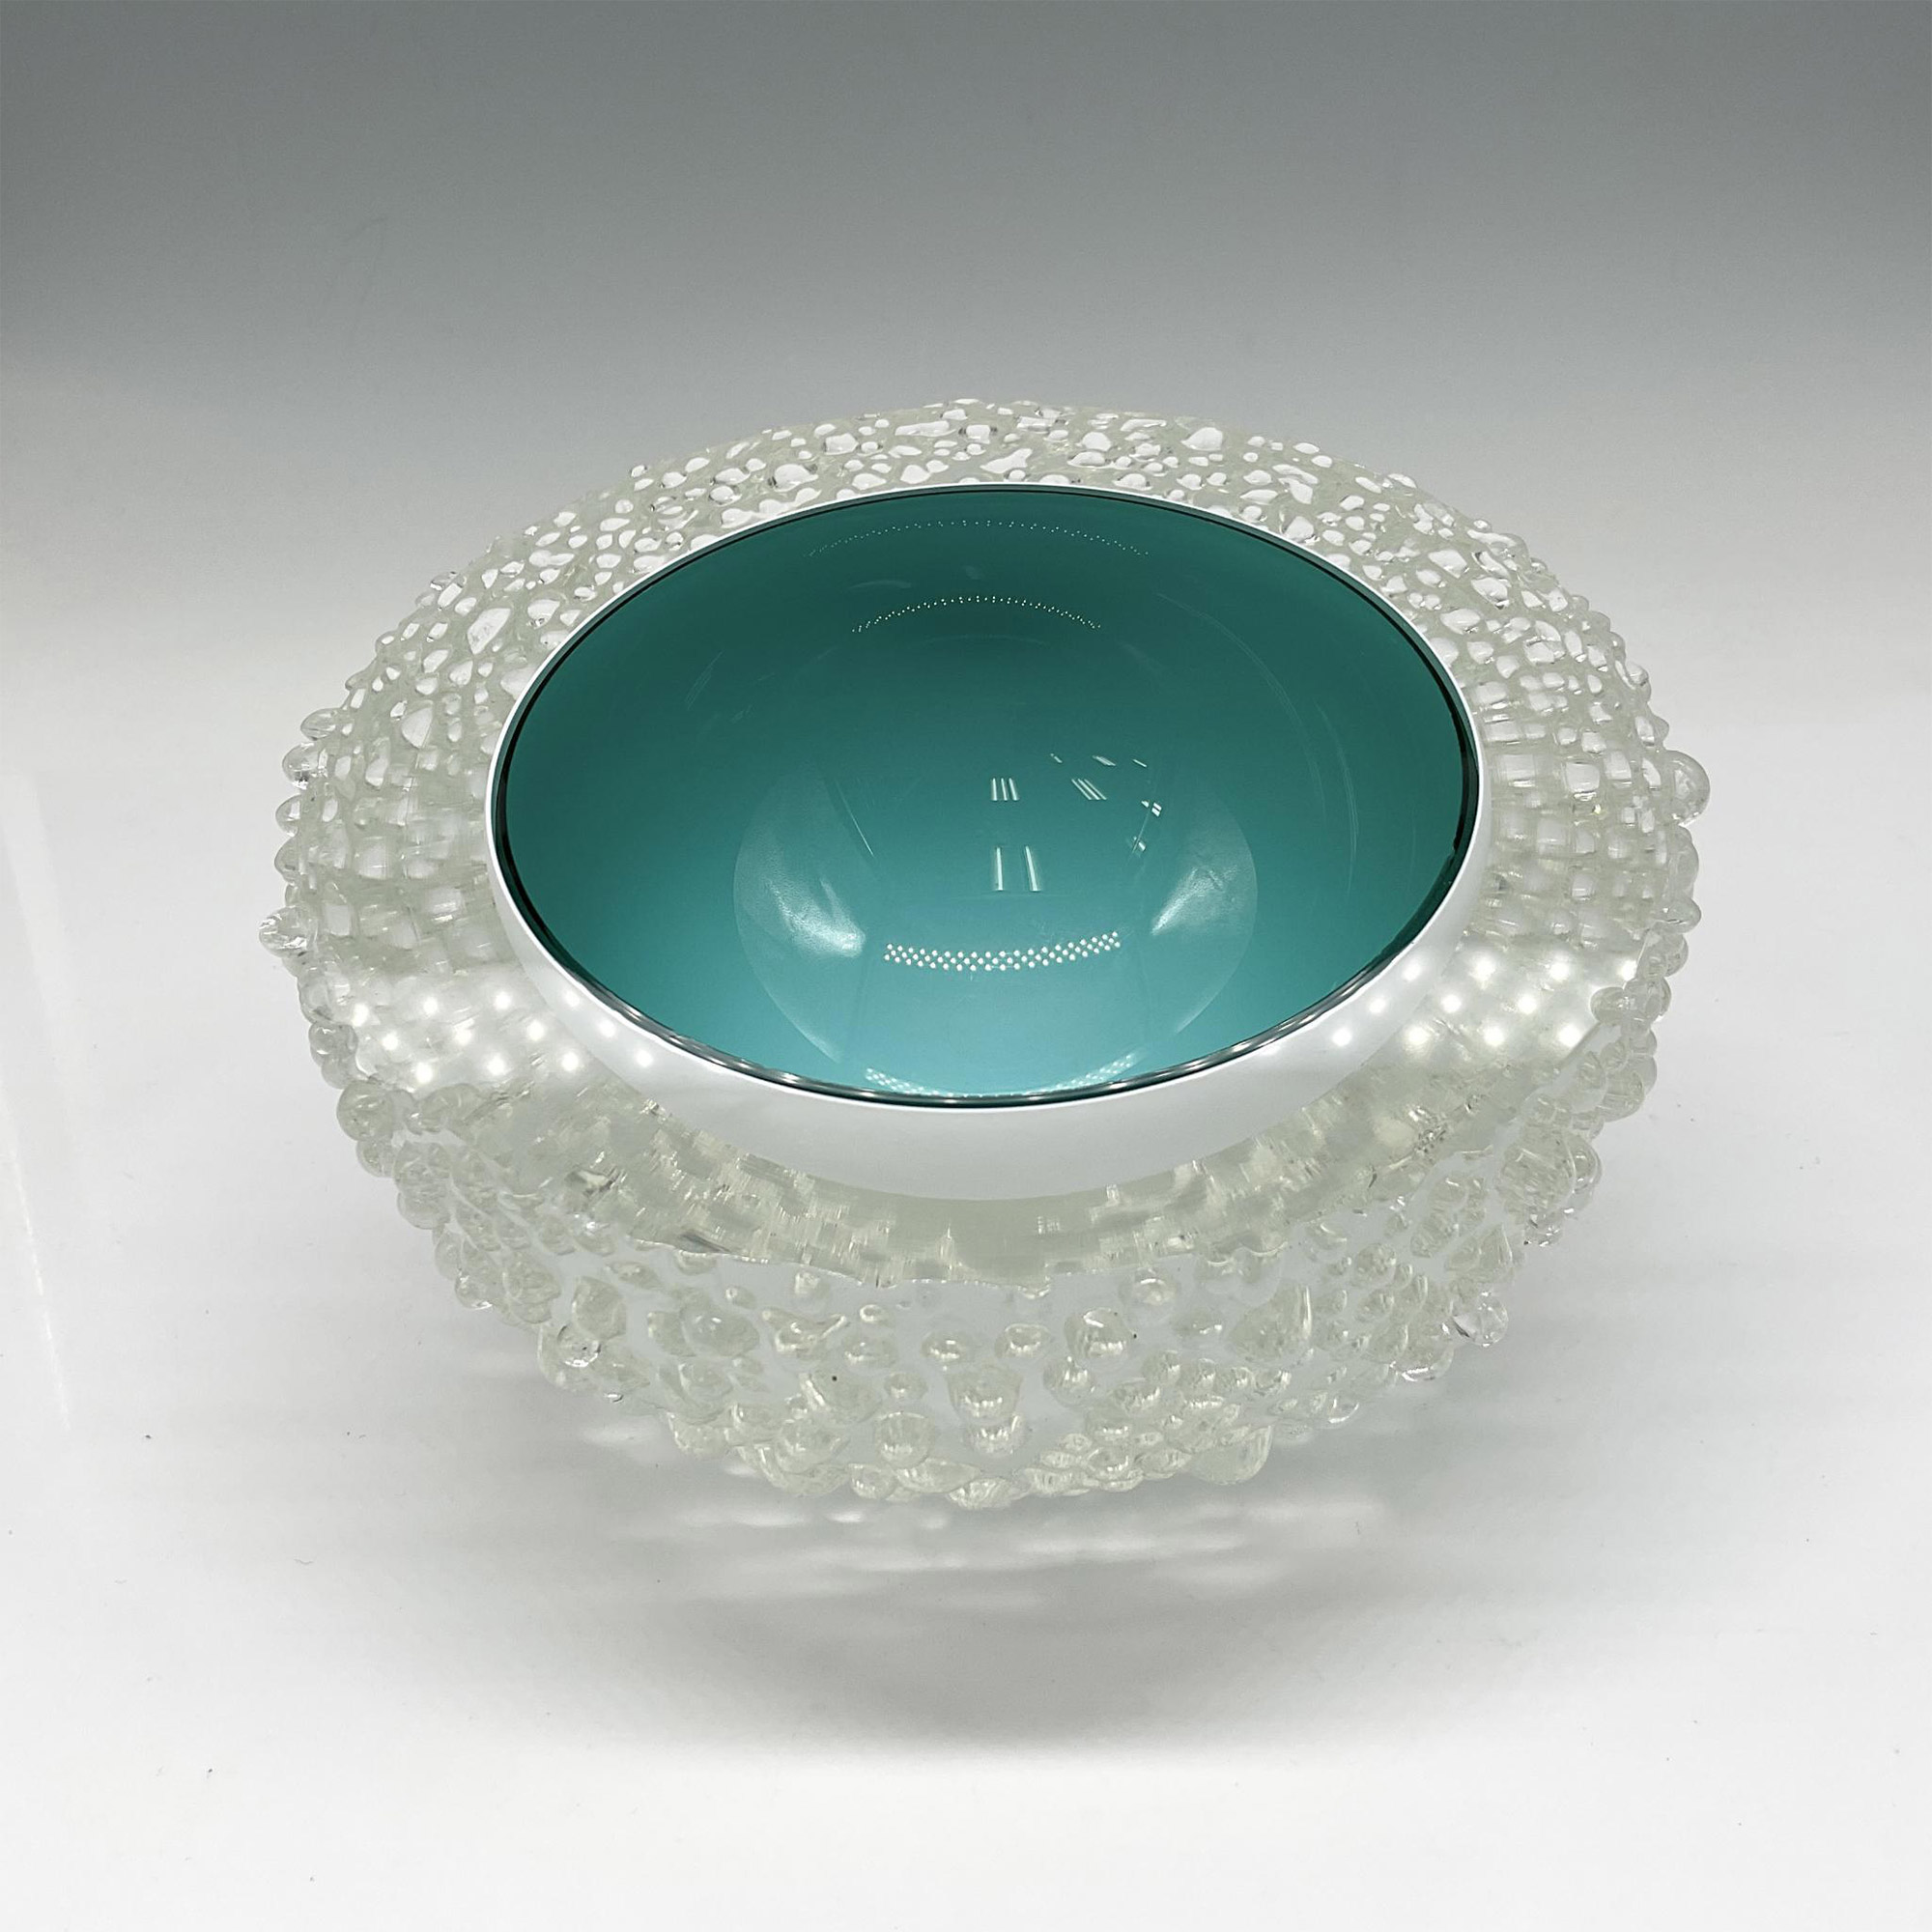 Molly Stone Urchin Form Art Glass Bowl, Signed